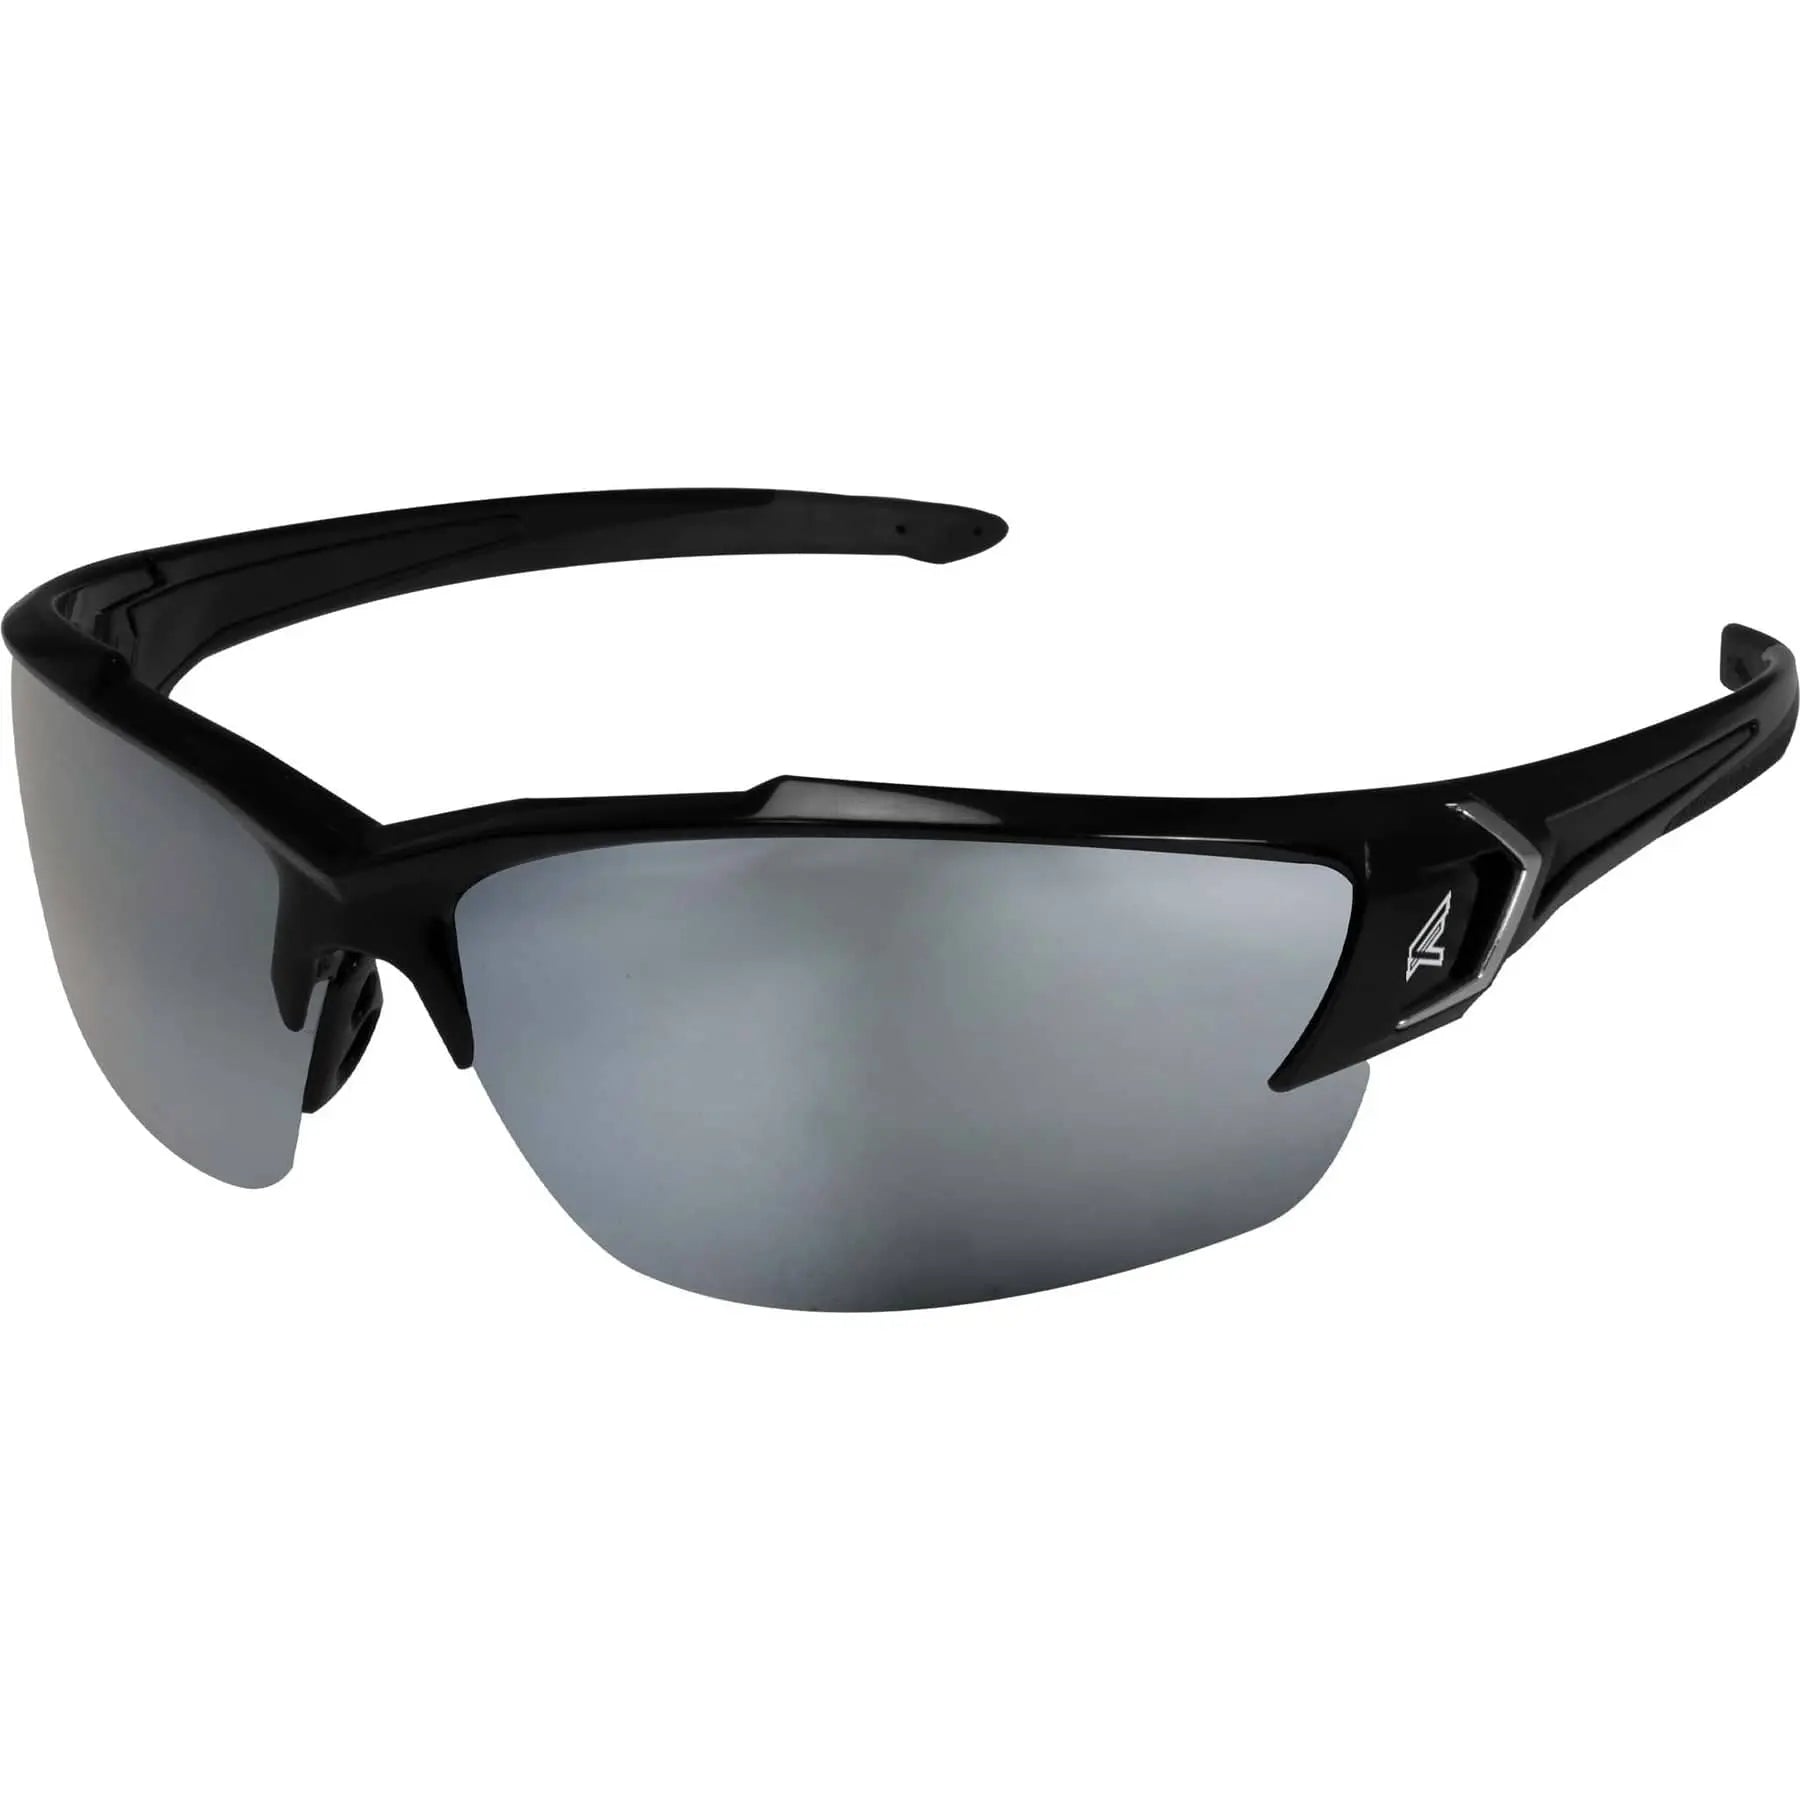 EDGE - Khor G2 Safety Glasses, Silver Mirror - Becker Safety and Supply